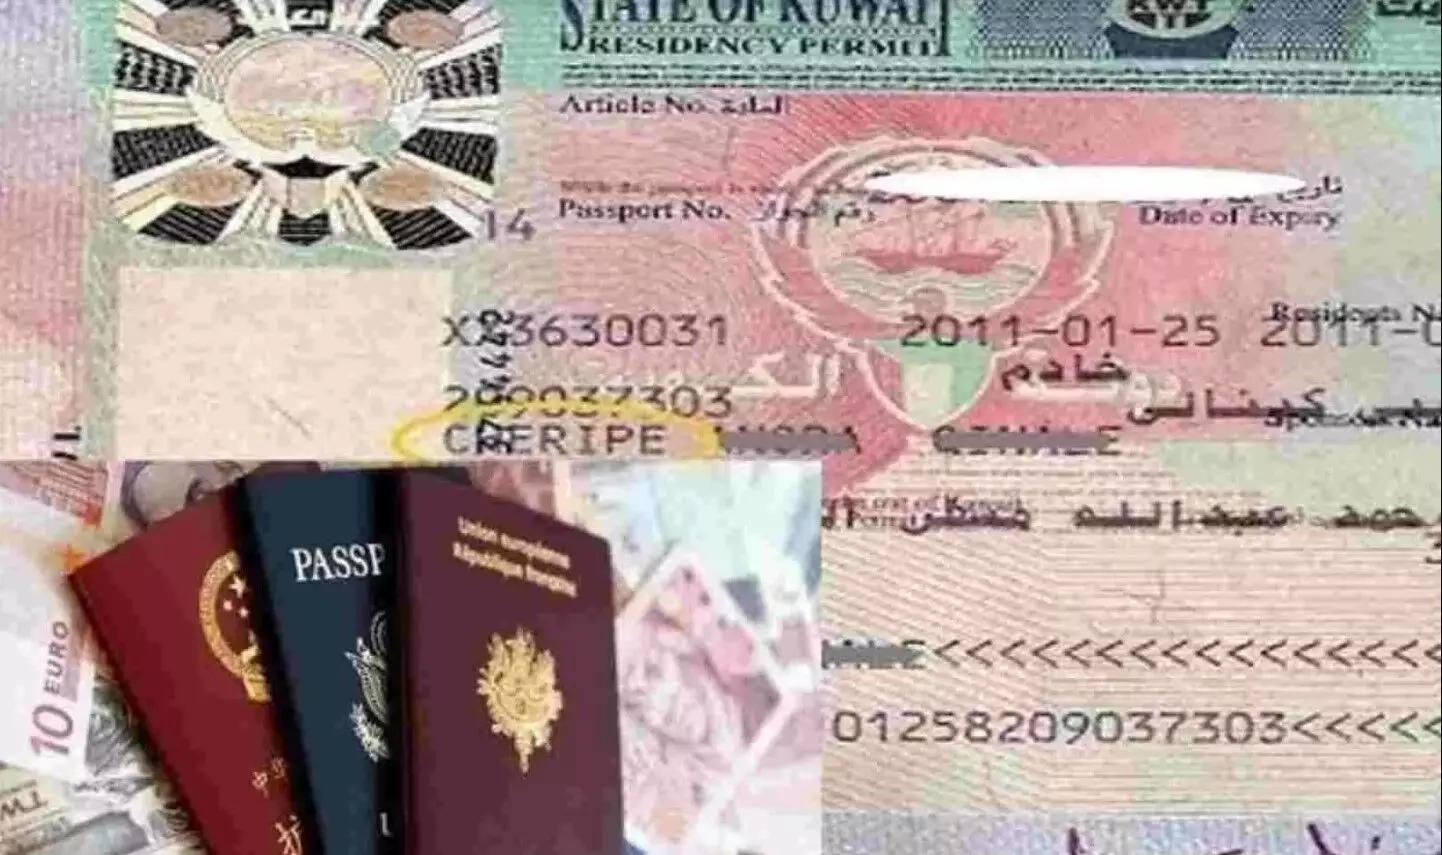 No work permit for senior expats without degrees in Kuwait, confirms authorities